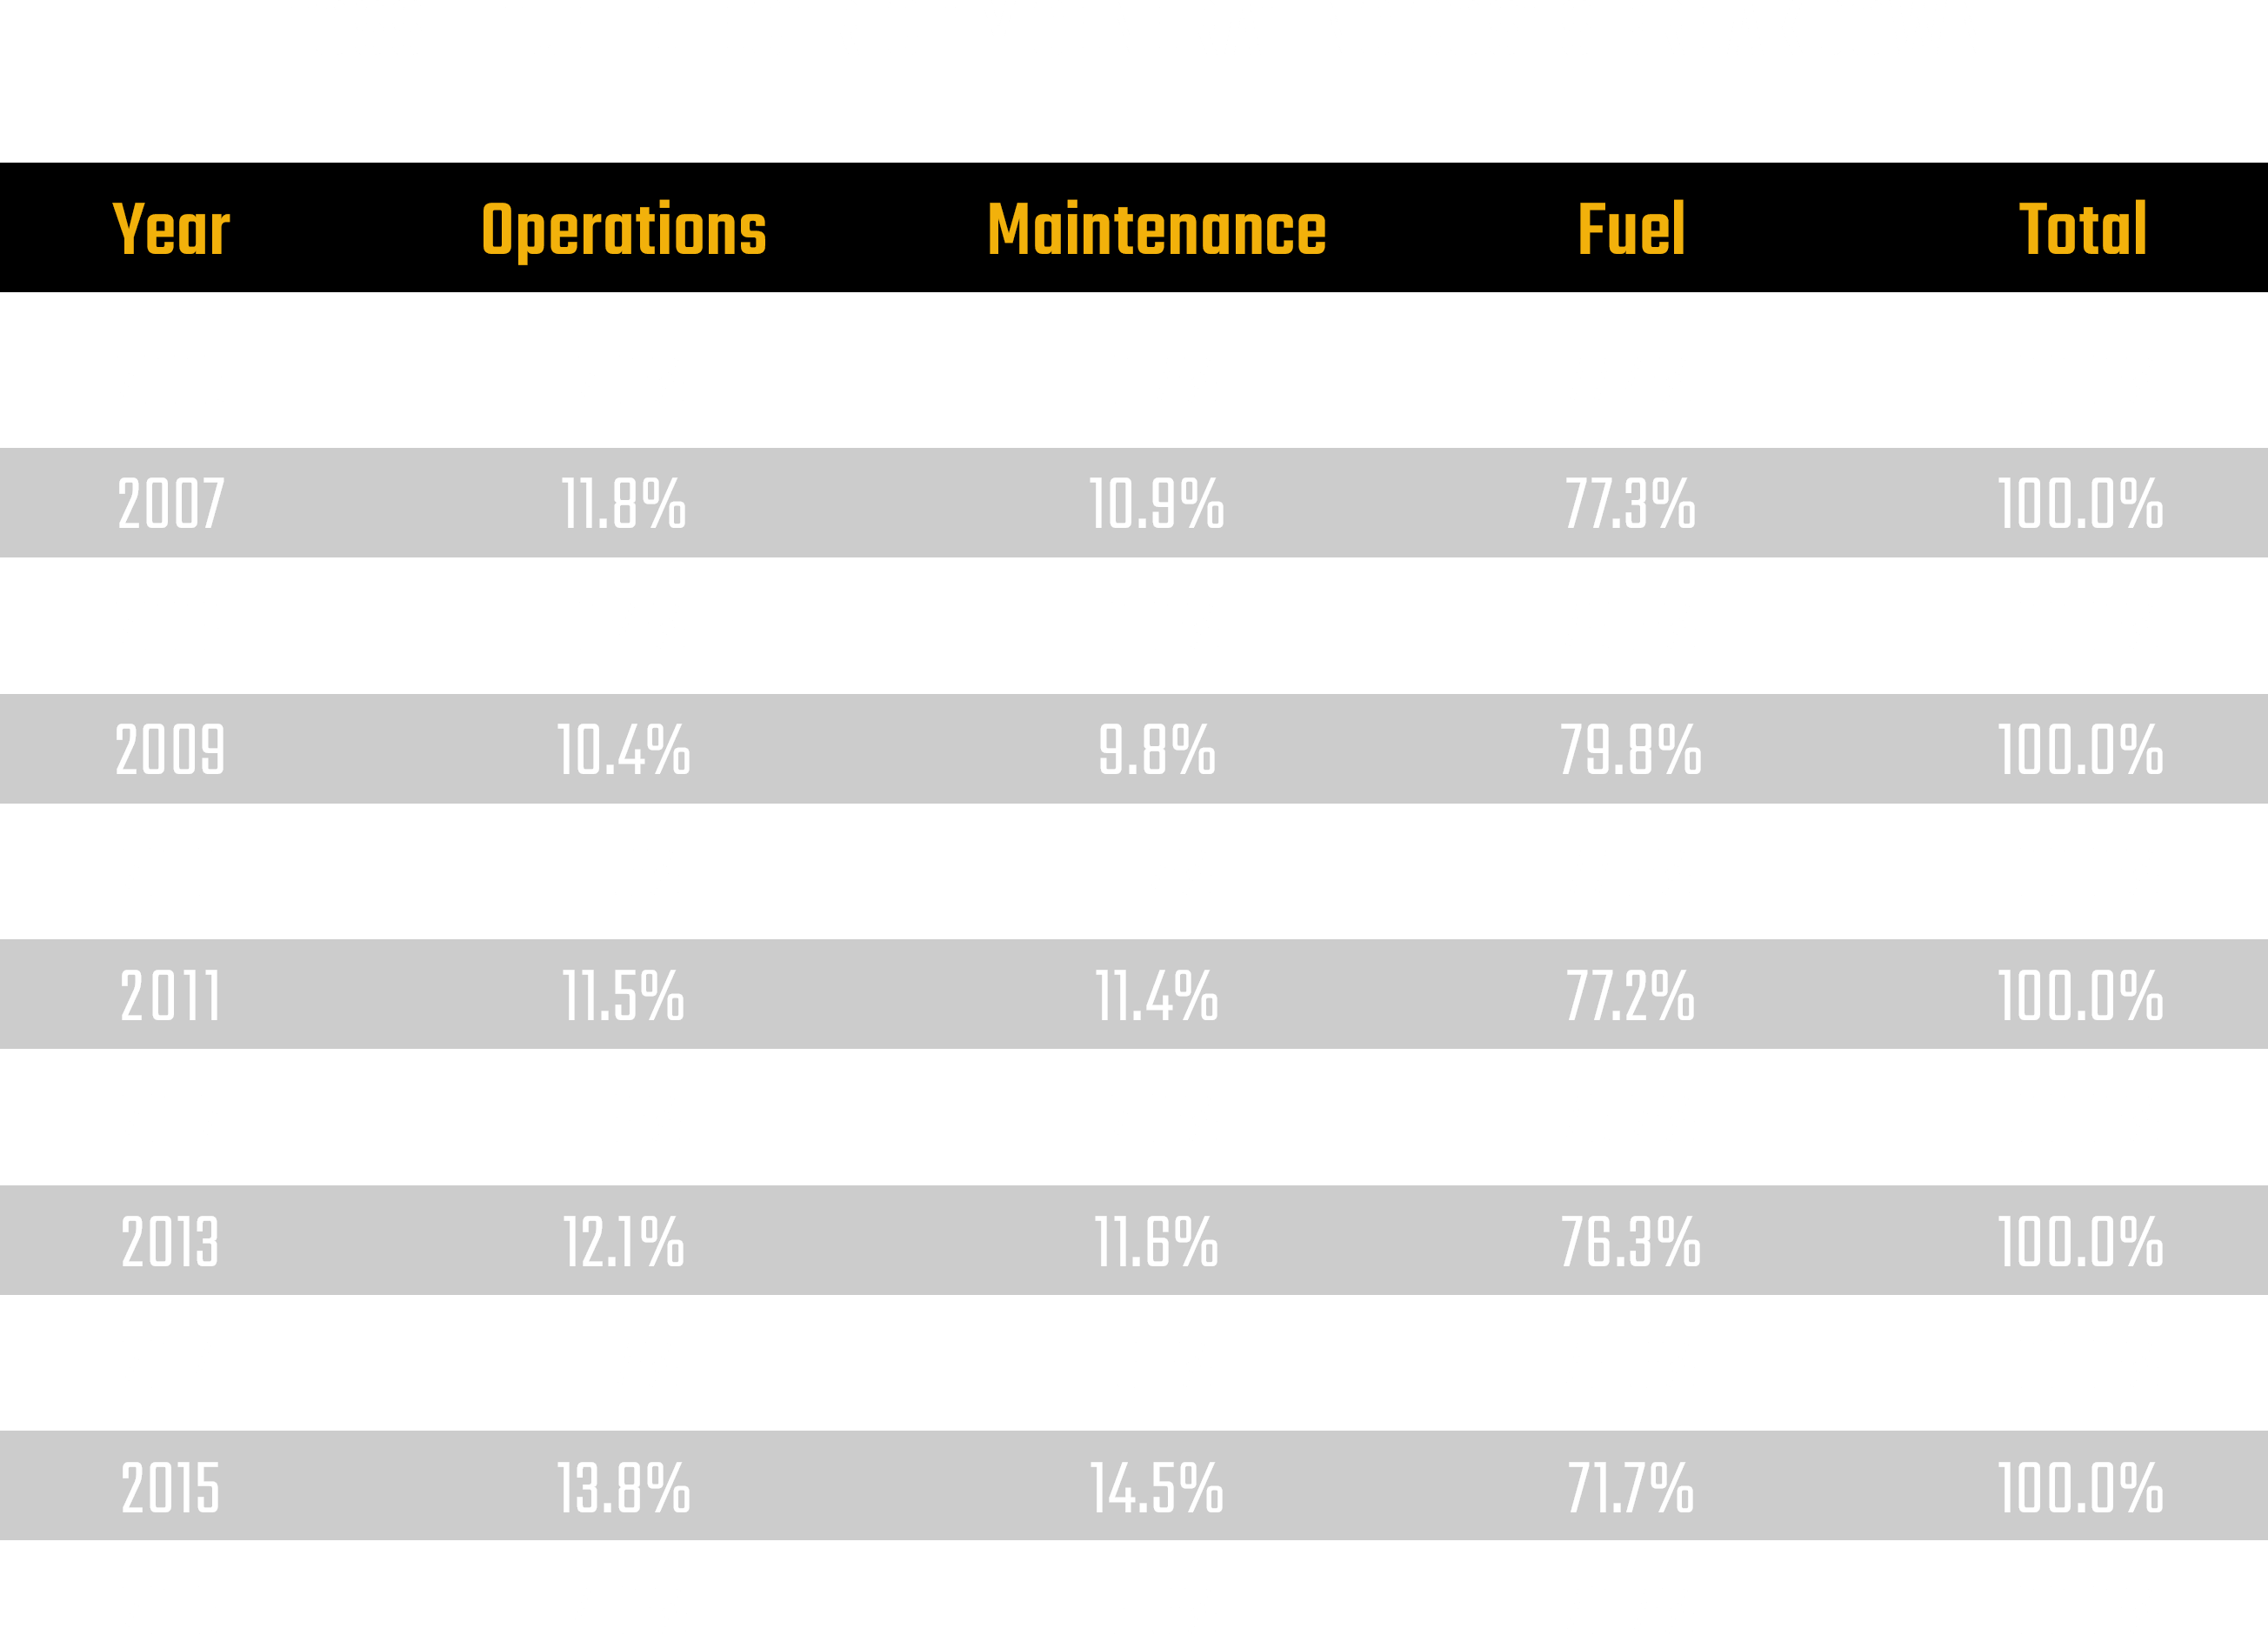 Fossil fuel electricity generating costs breakdown